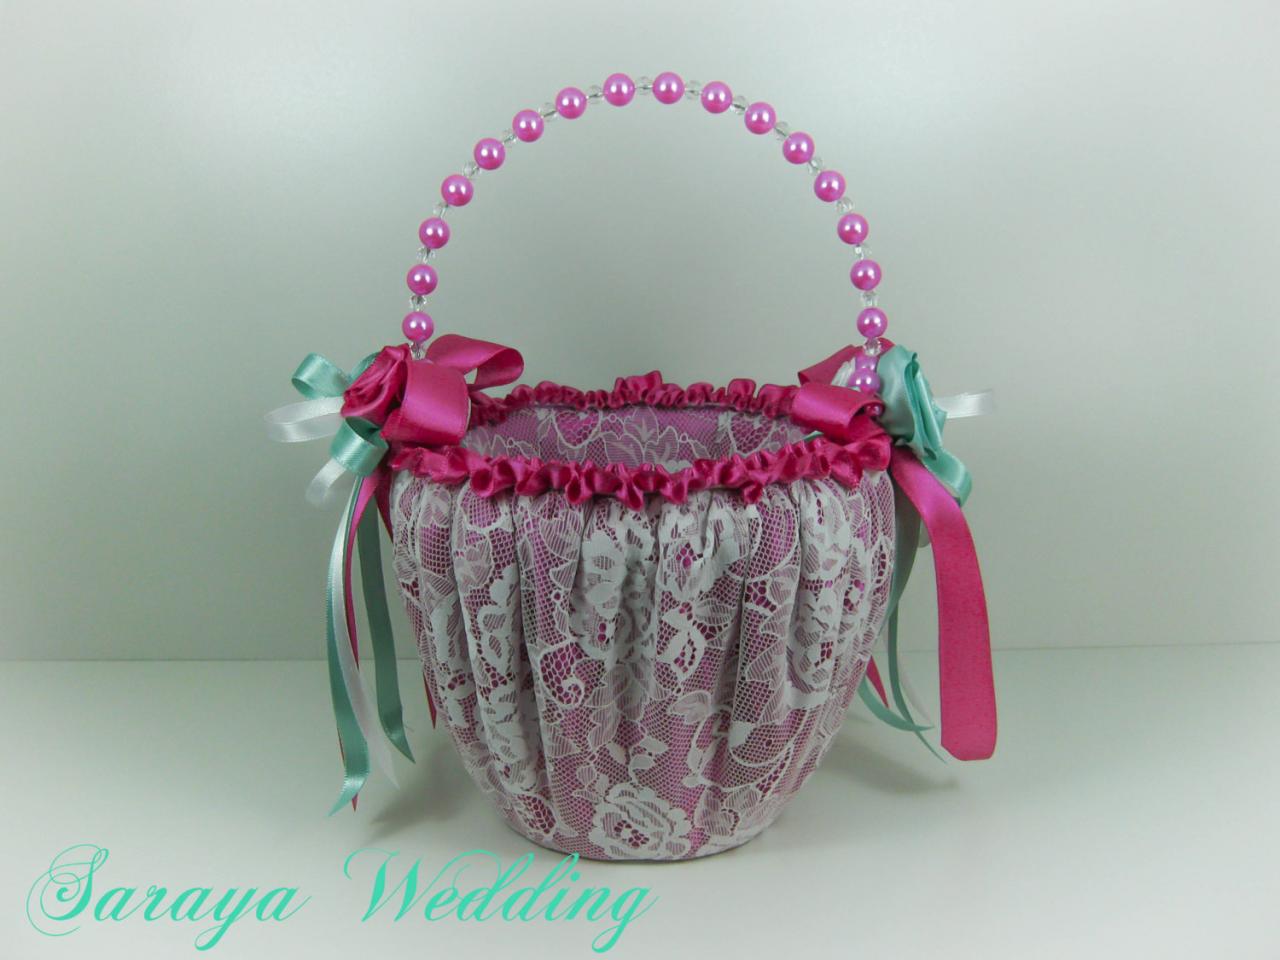 Flower Girl Basket, Wedding Basket In Fuchsia Satin, White Lace With Blue Green, White And Fuchsia Roses